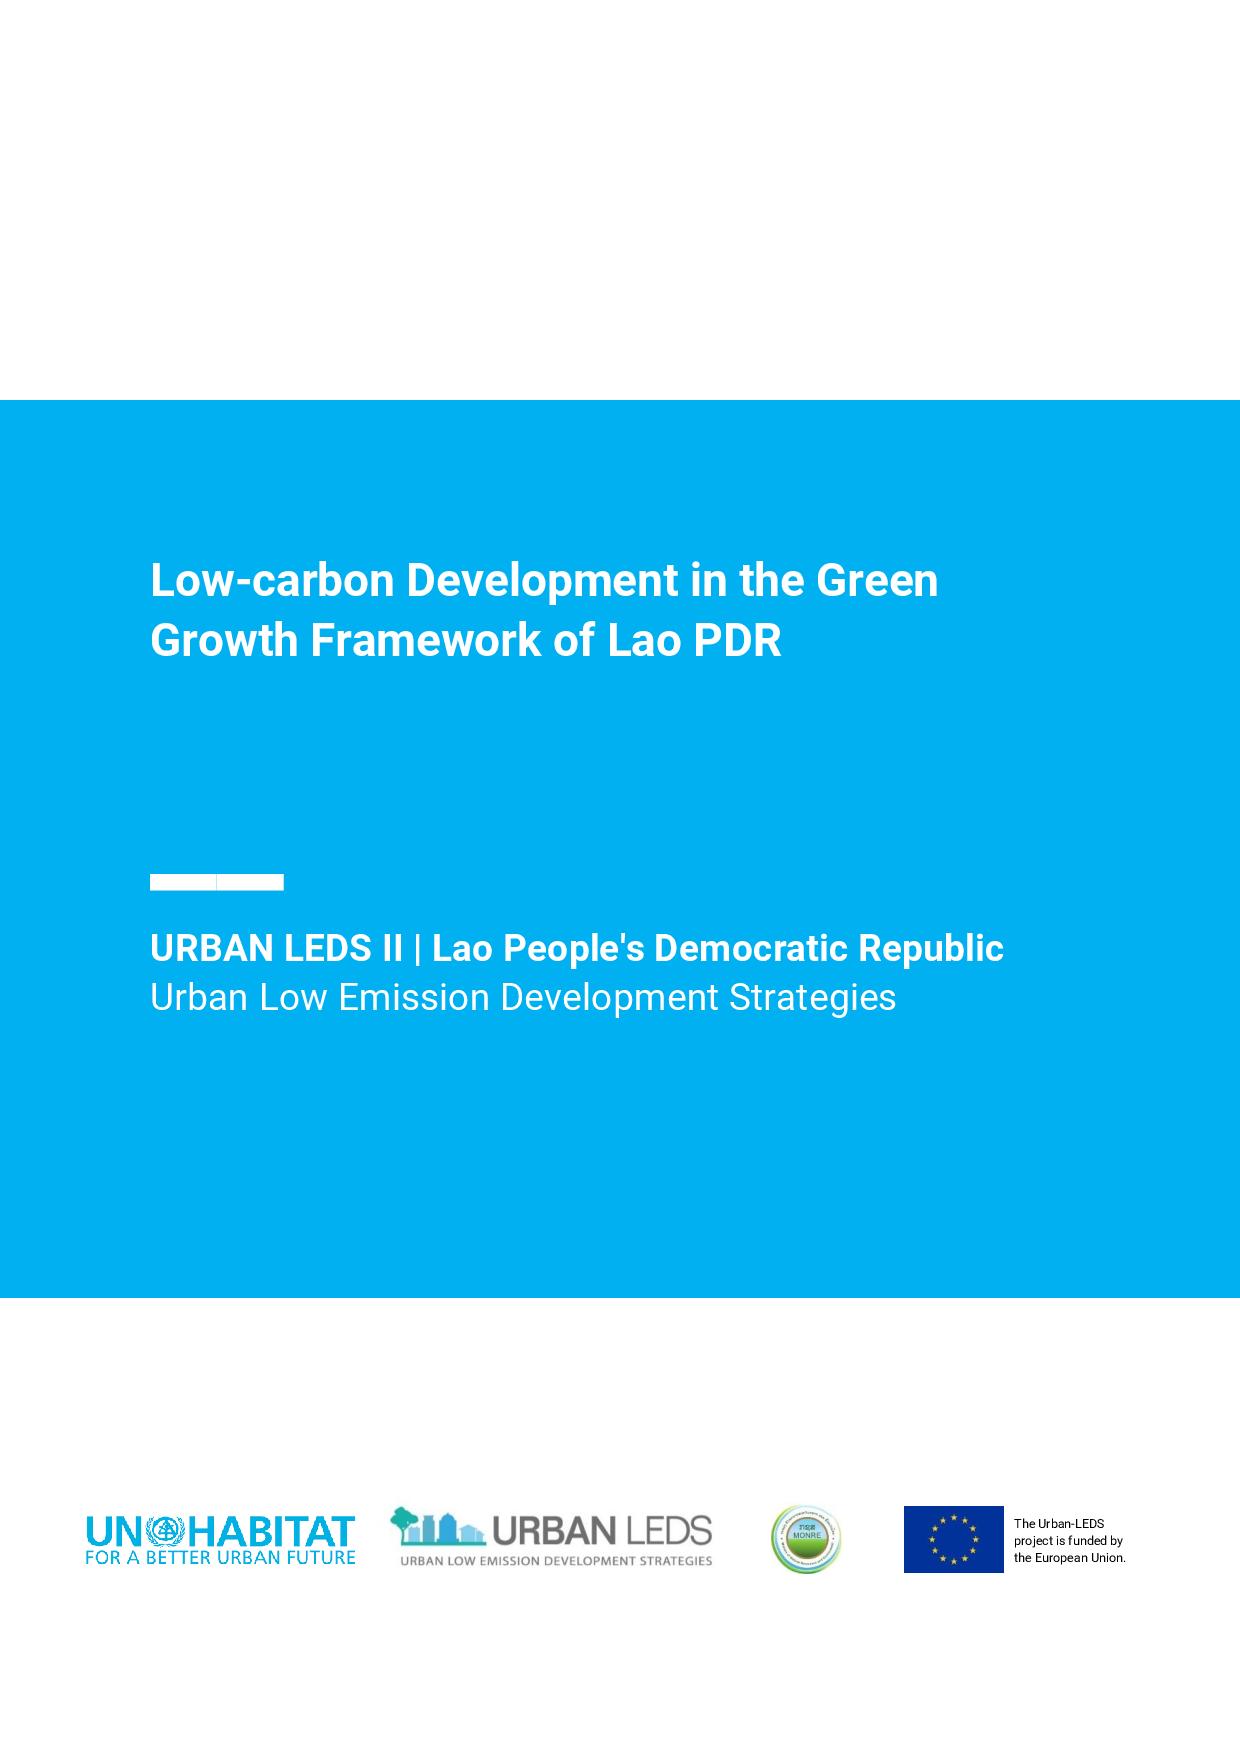 Low-carbon Development in the Green Growth Framework of Lao PDR (2022)